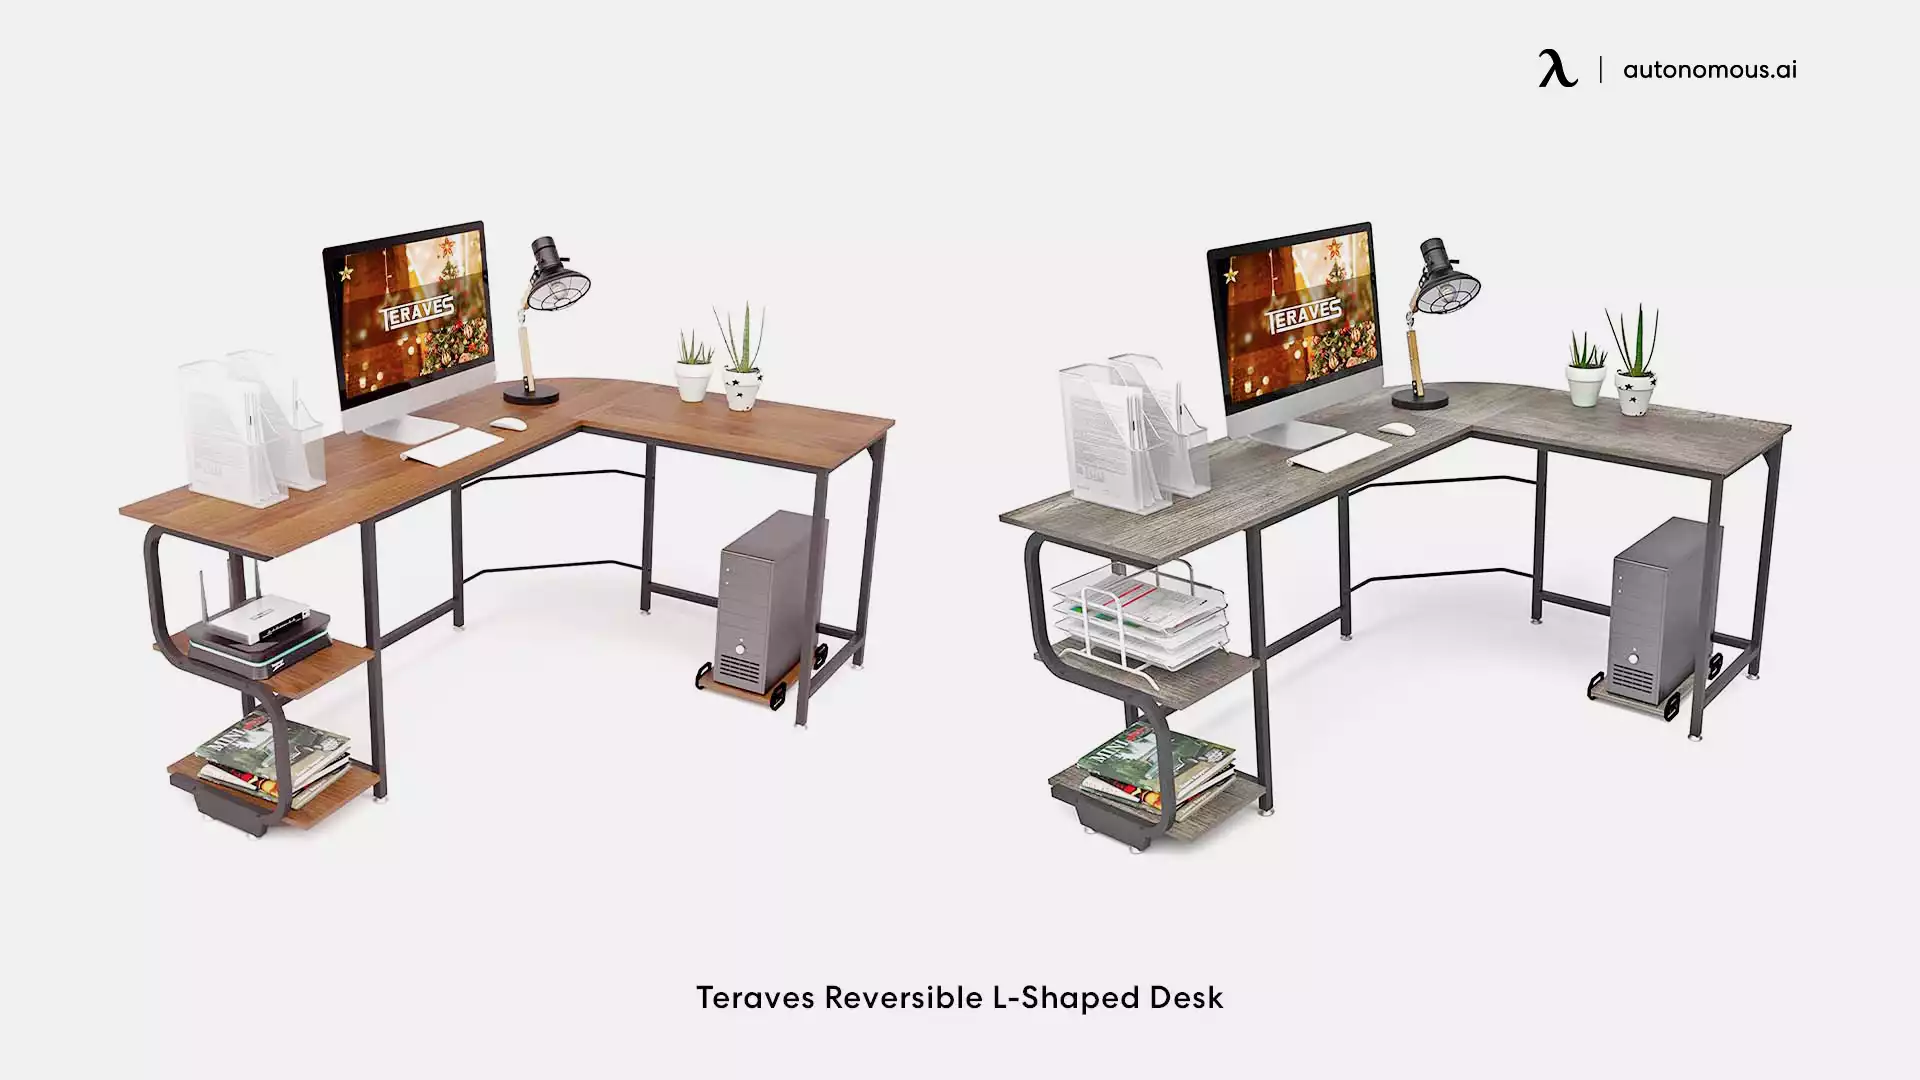 The Reversible L-Shaped Desk with Shelves by Teraves